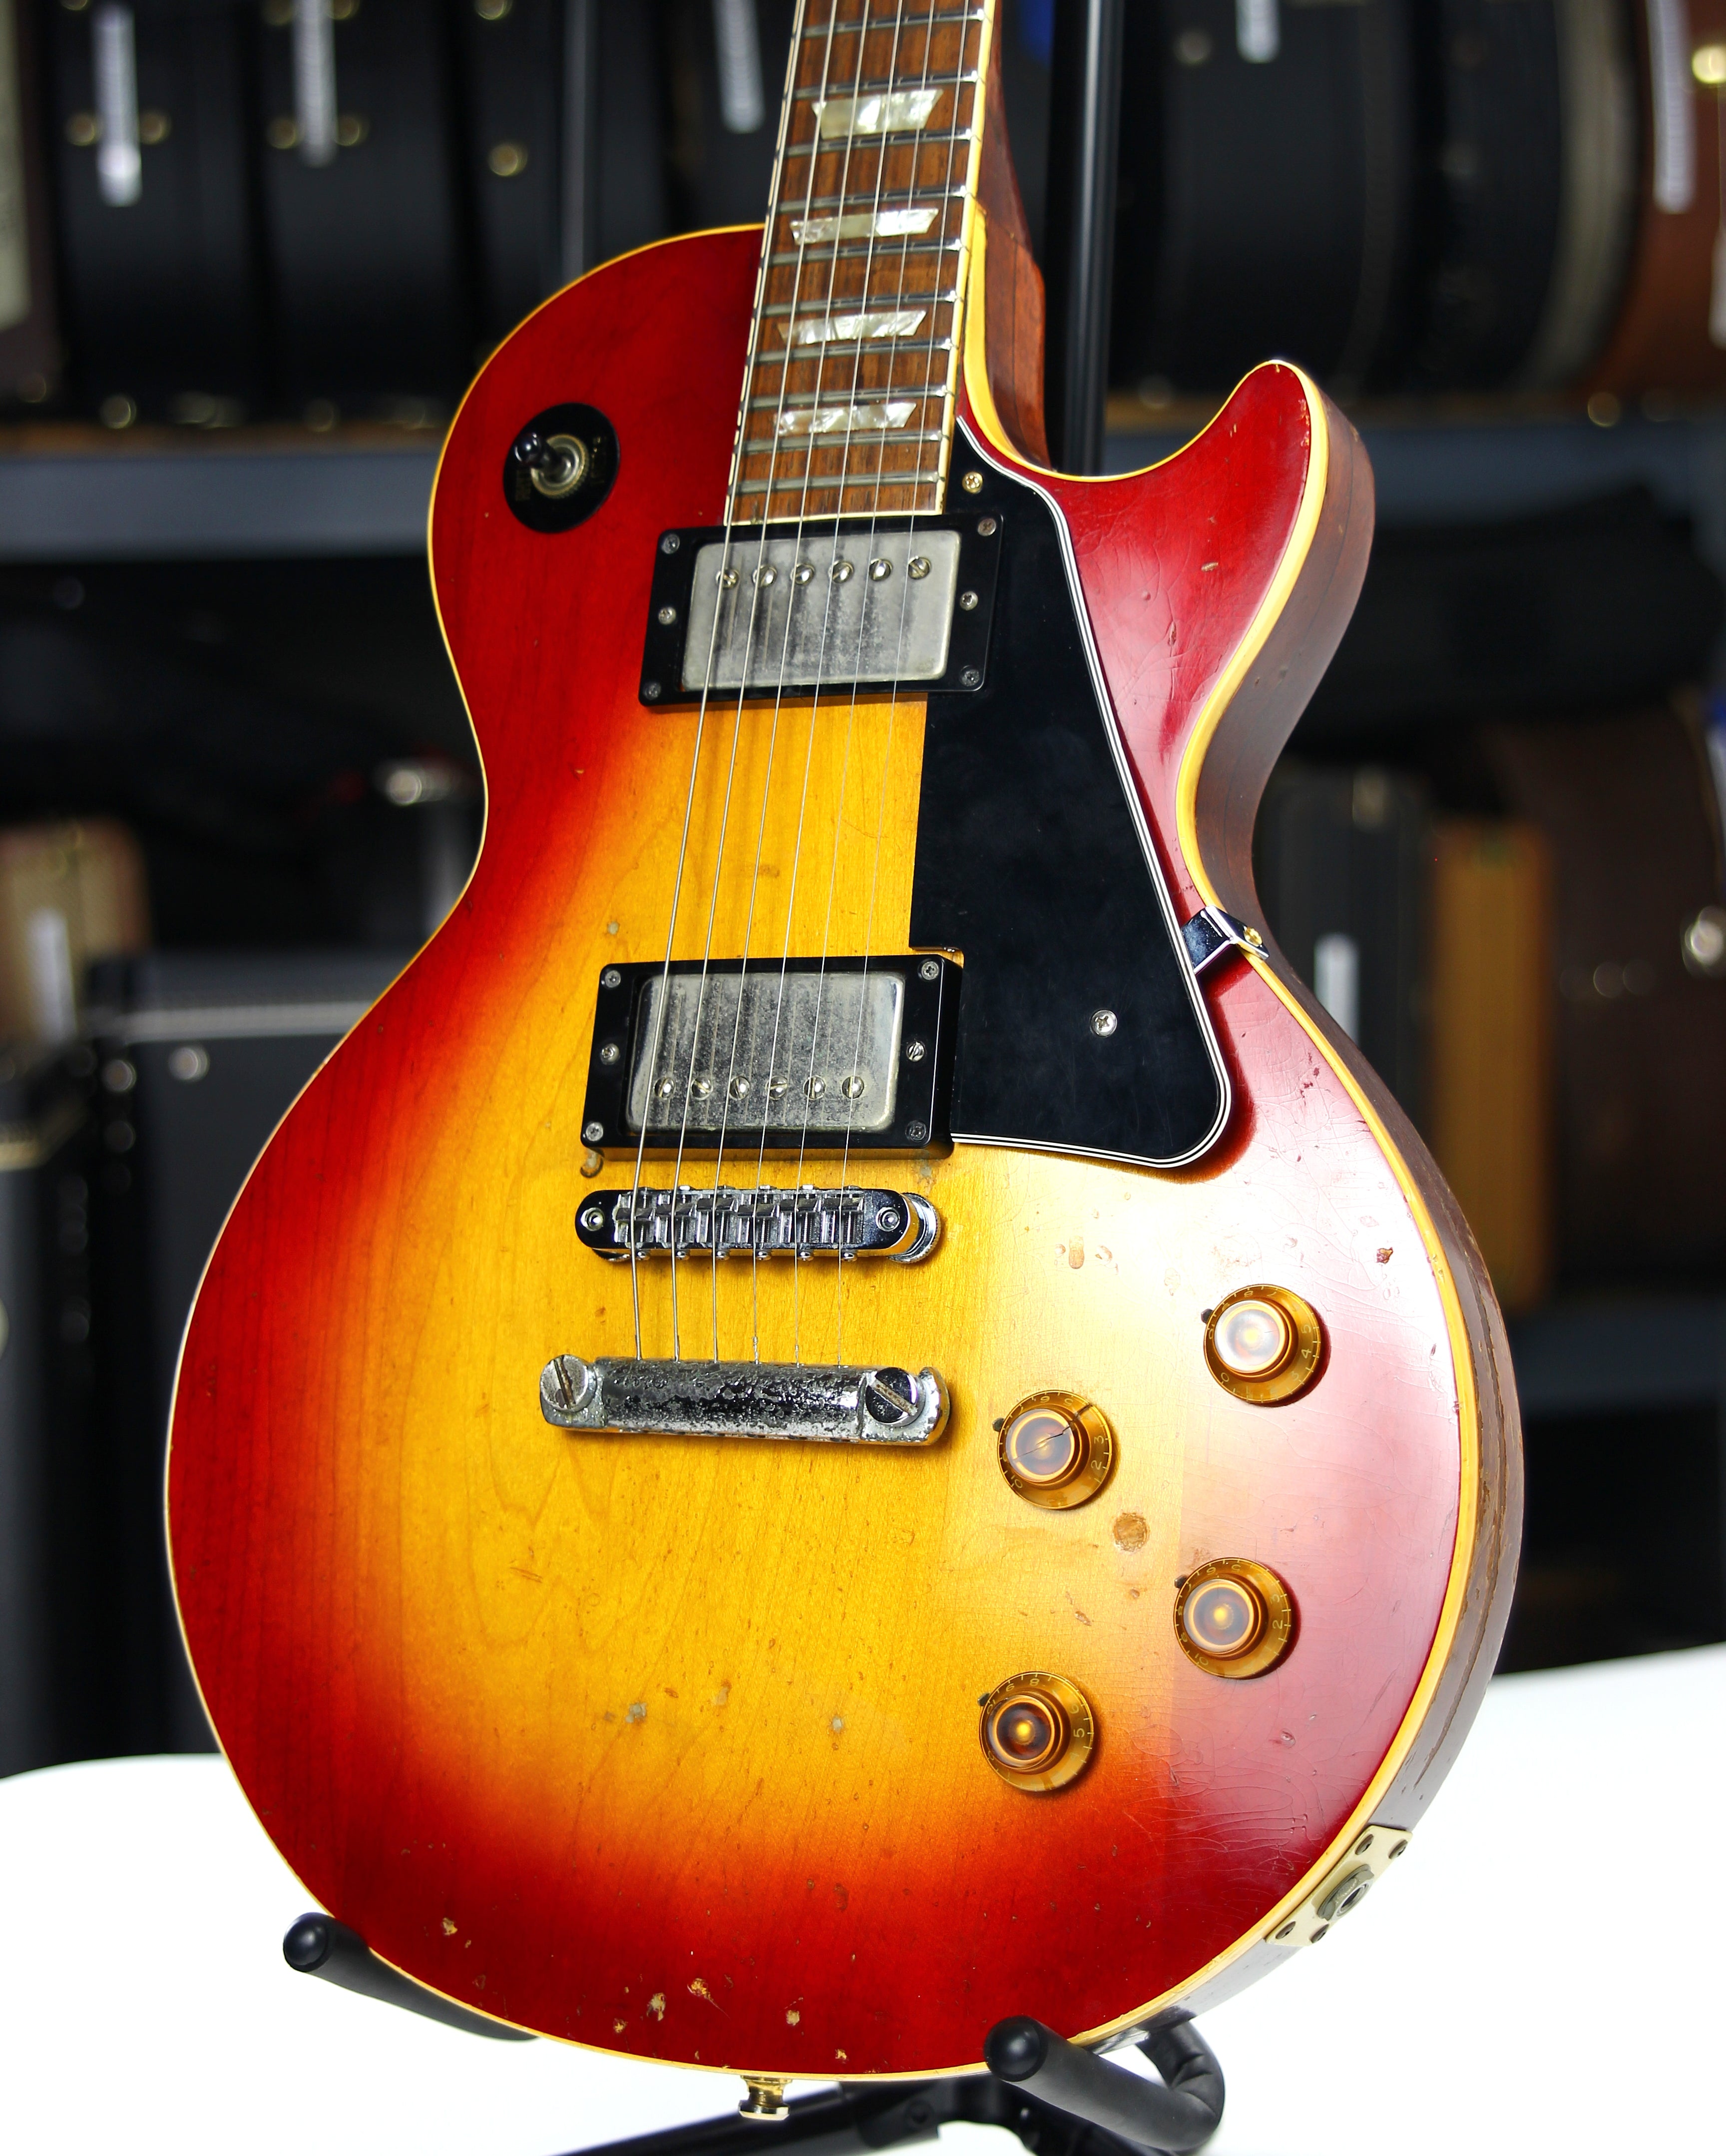 *SOLD*  1971 Gibson Les Paul Standard Conversion Sunburst Deluxe - Chunky 1950’s Neck!